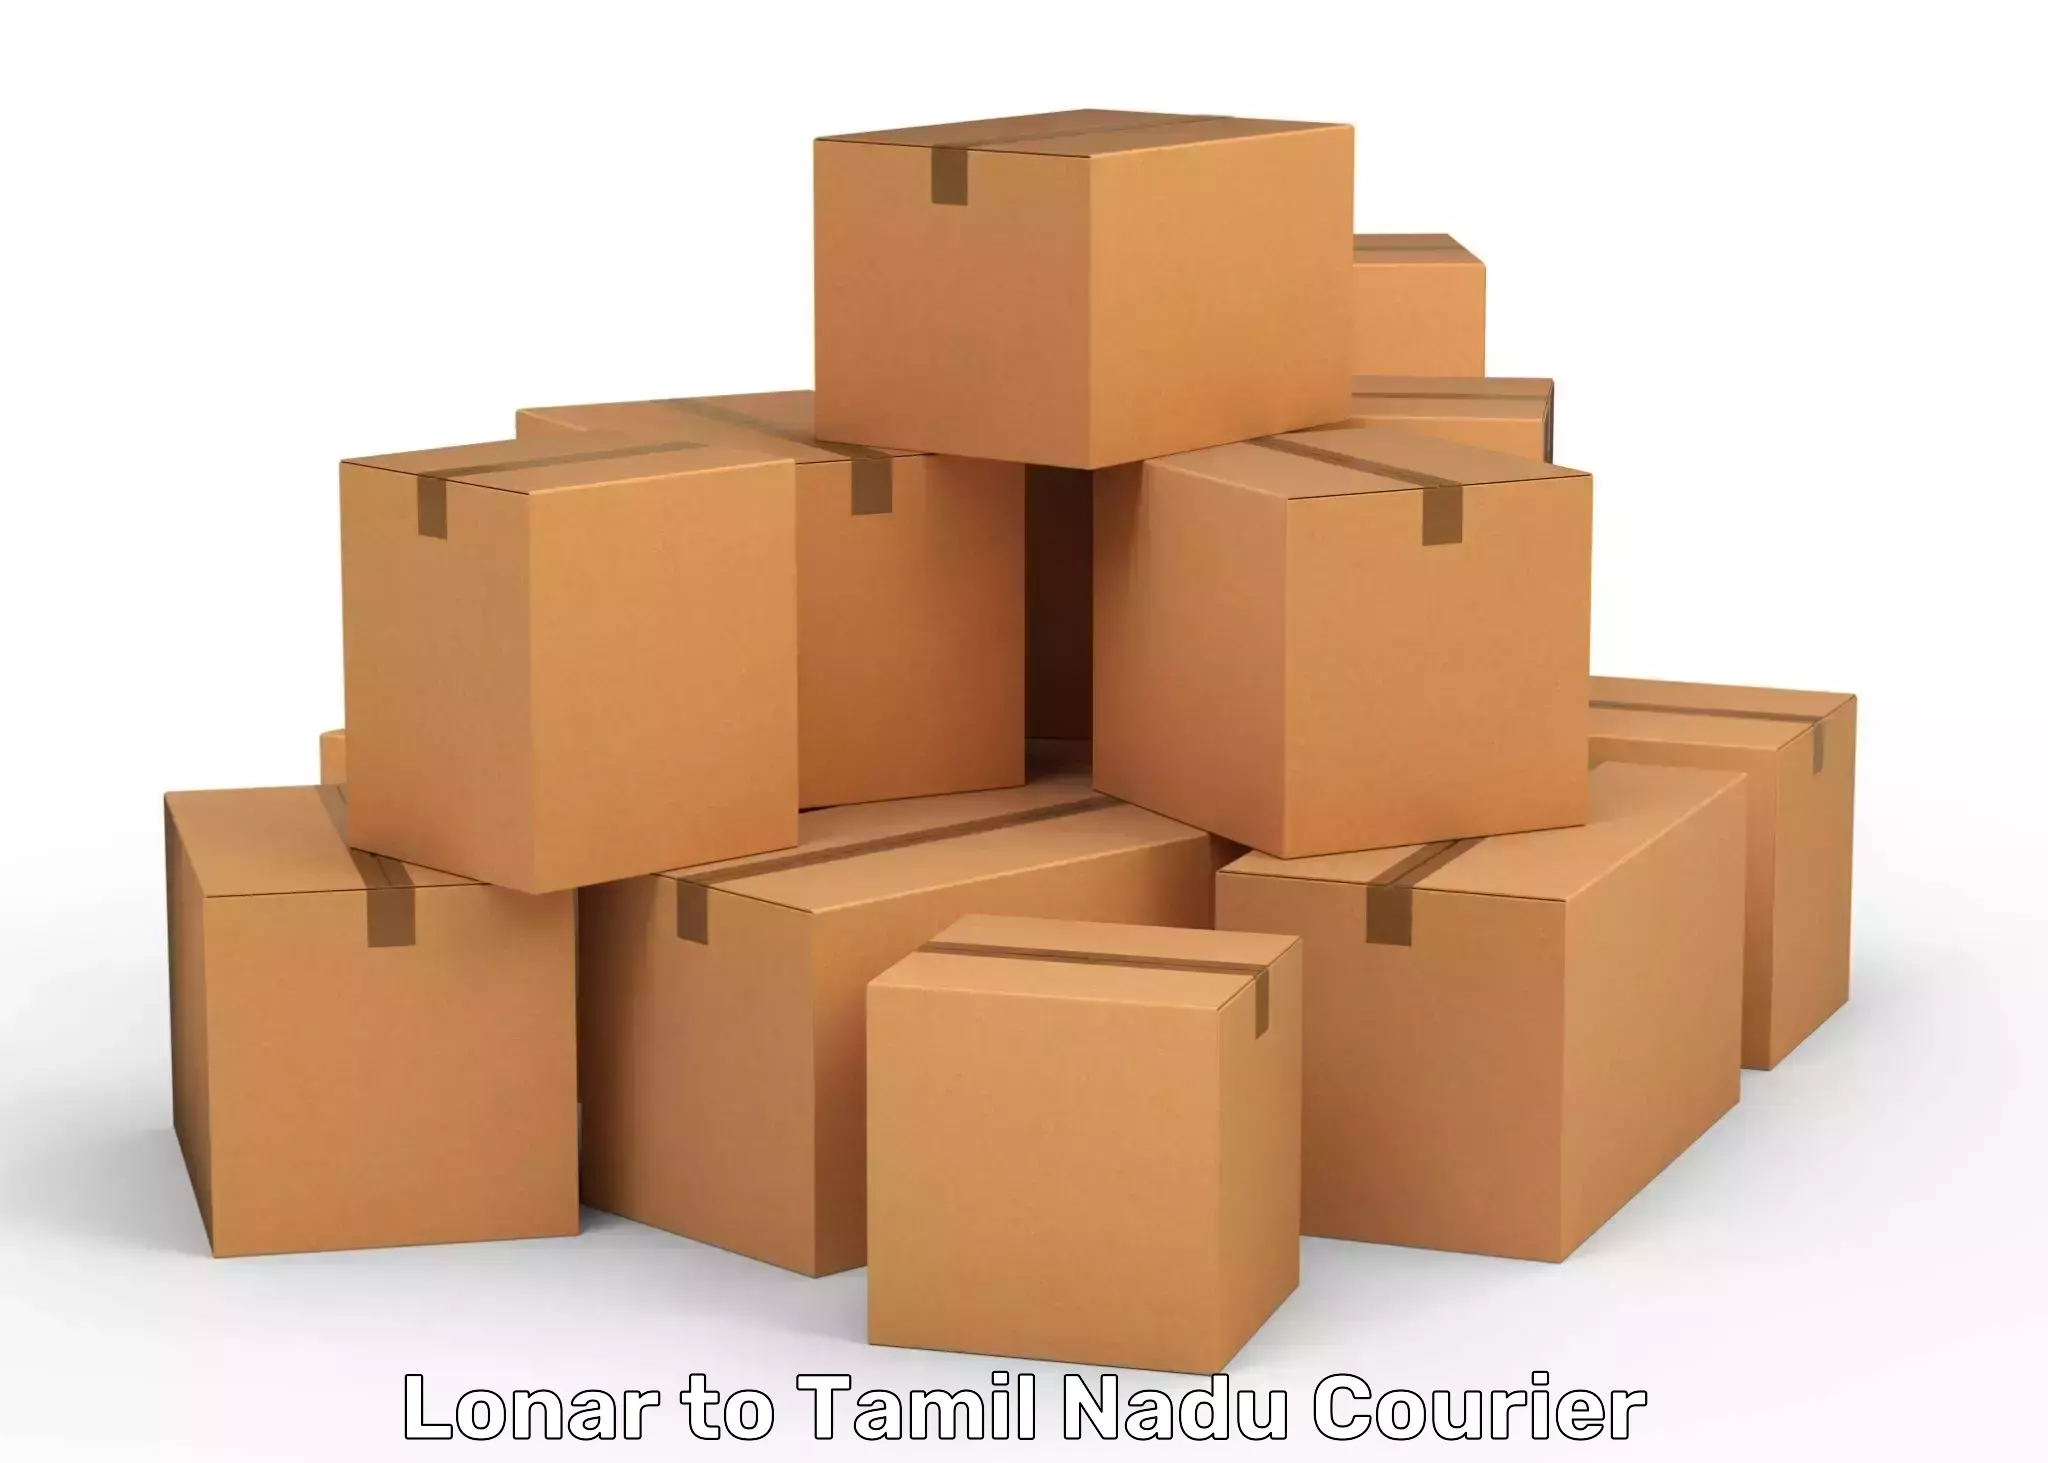 Courier app Lonar to Ennore Port Chennai